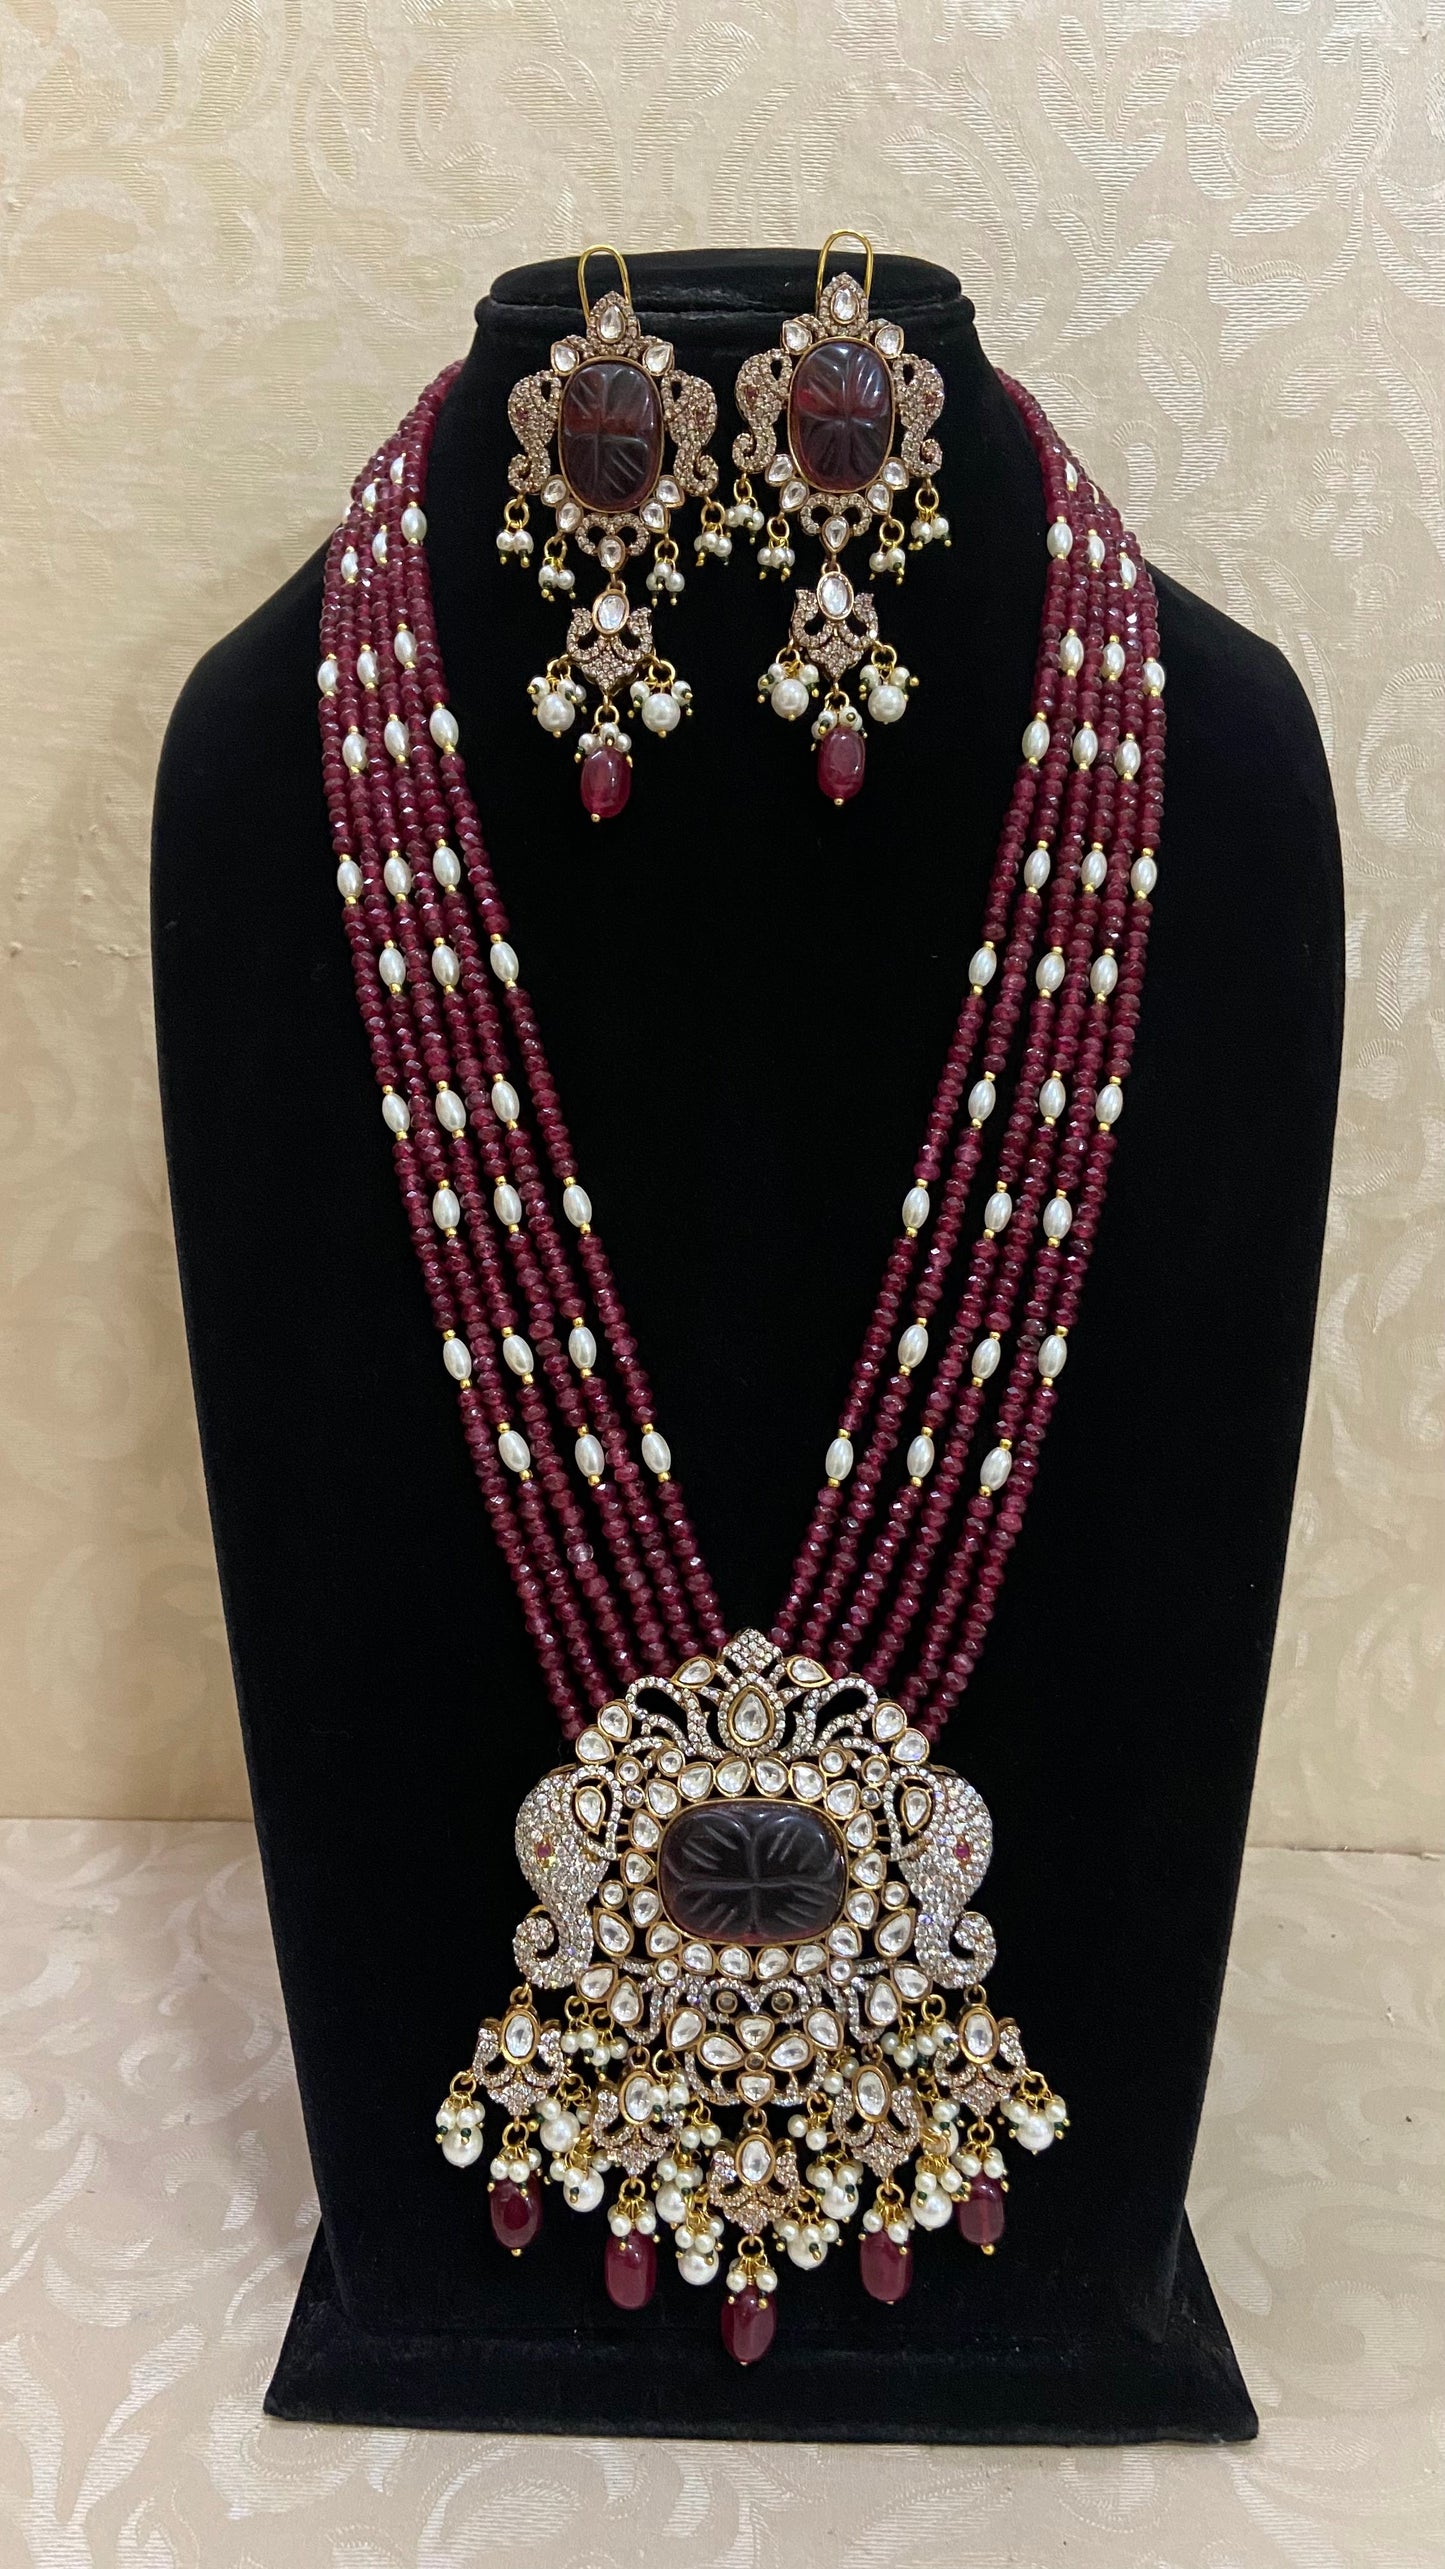 Victorian finish necklace | designer jewelry | Indian jewelry